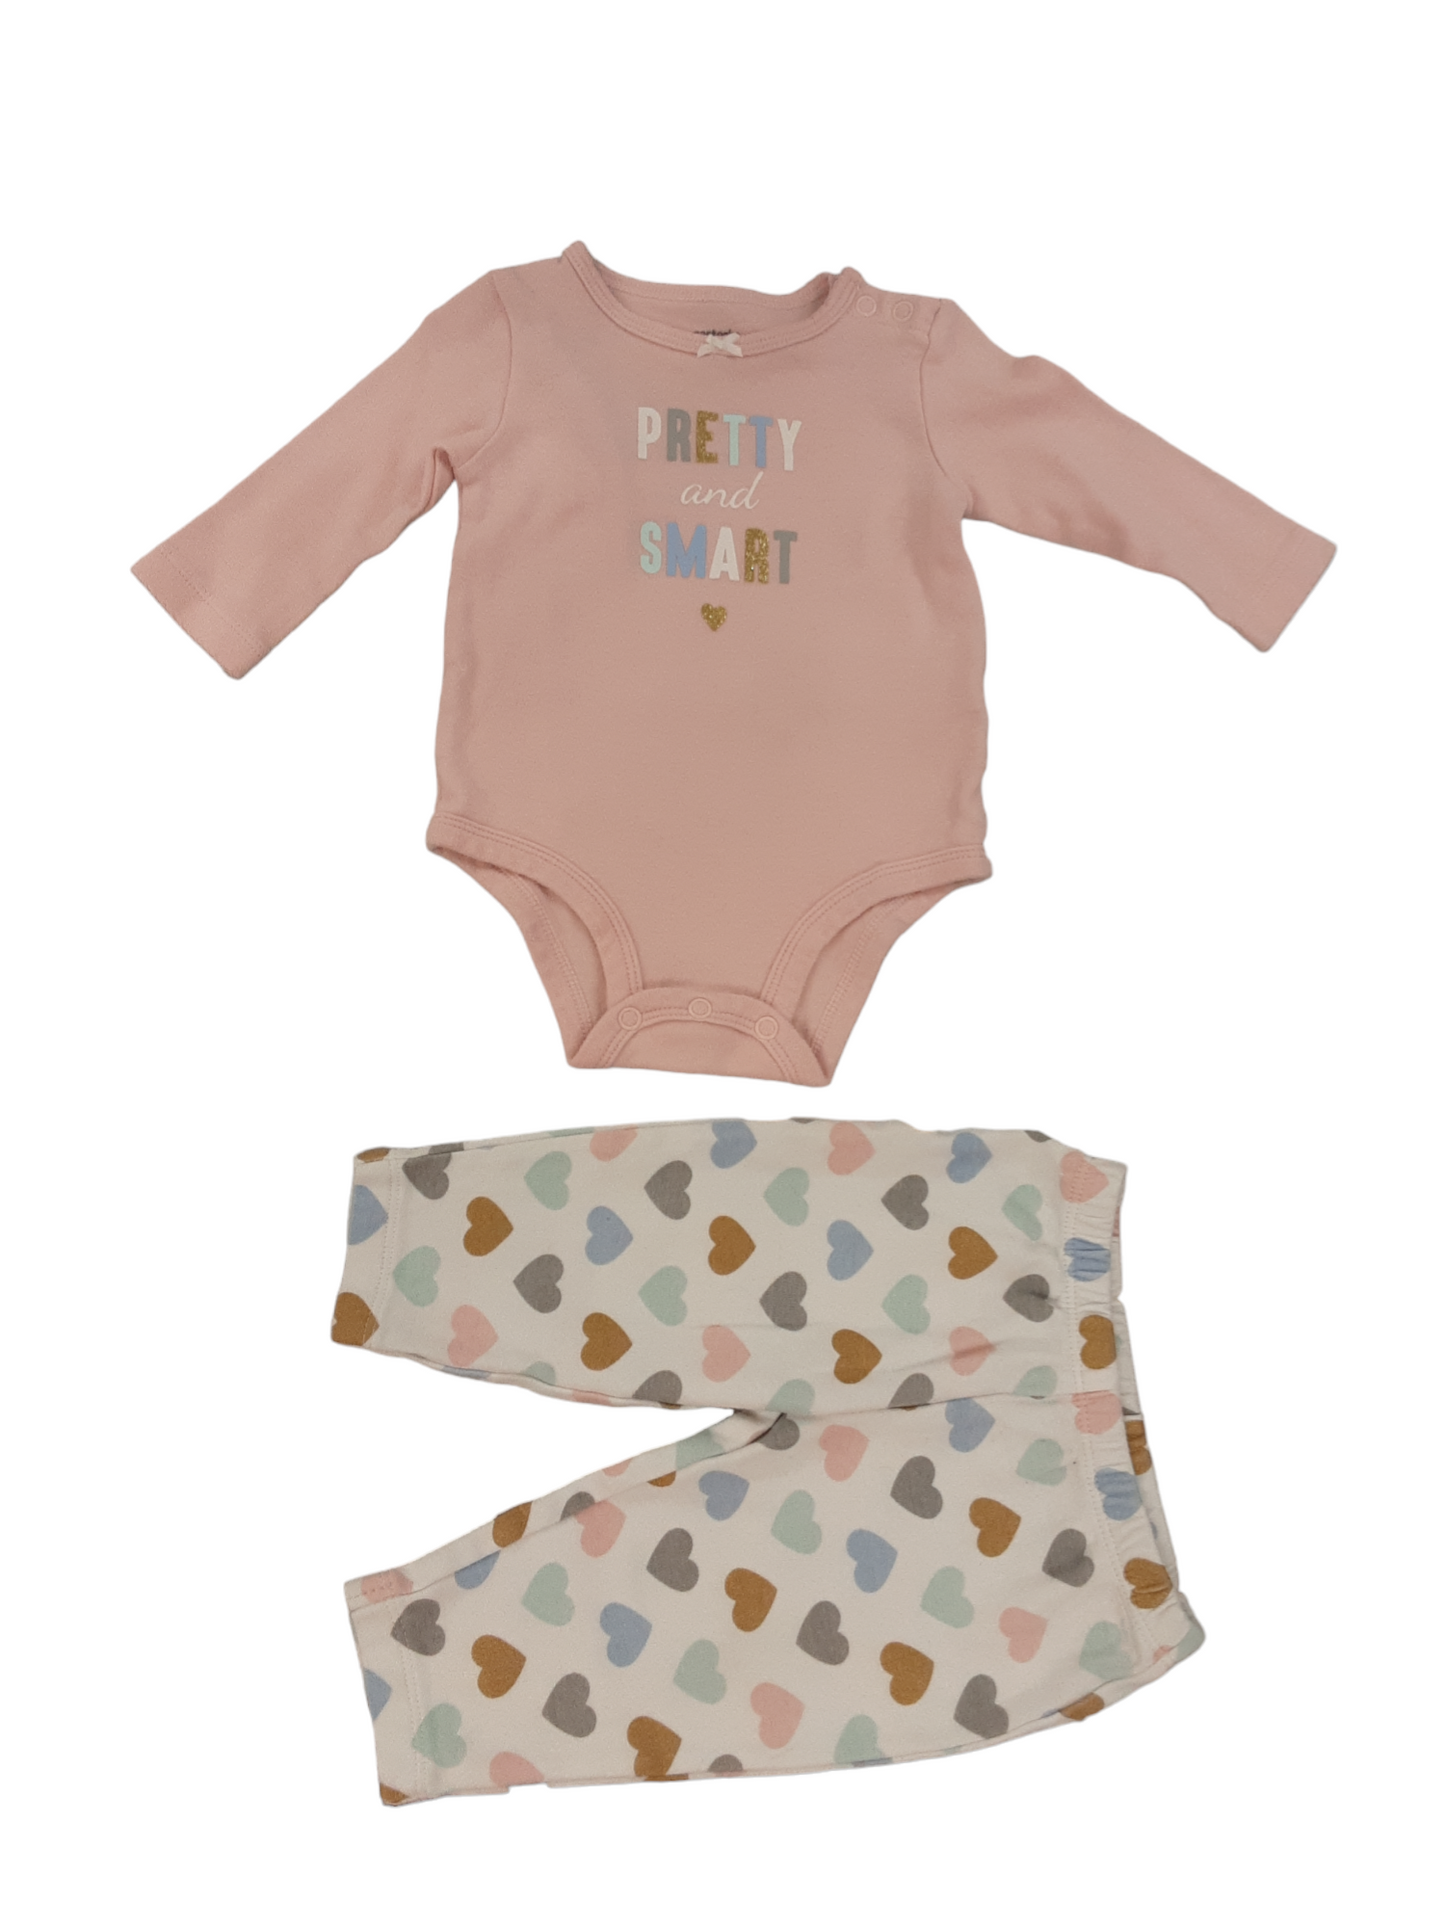 2 pc pretty and smart set size 6 months